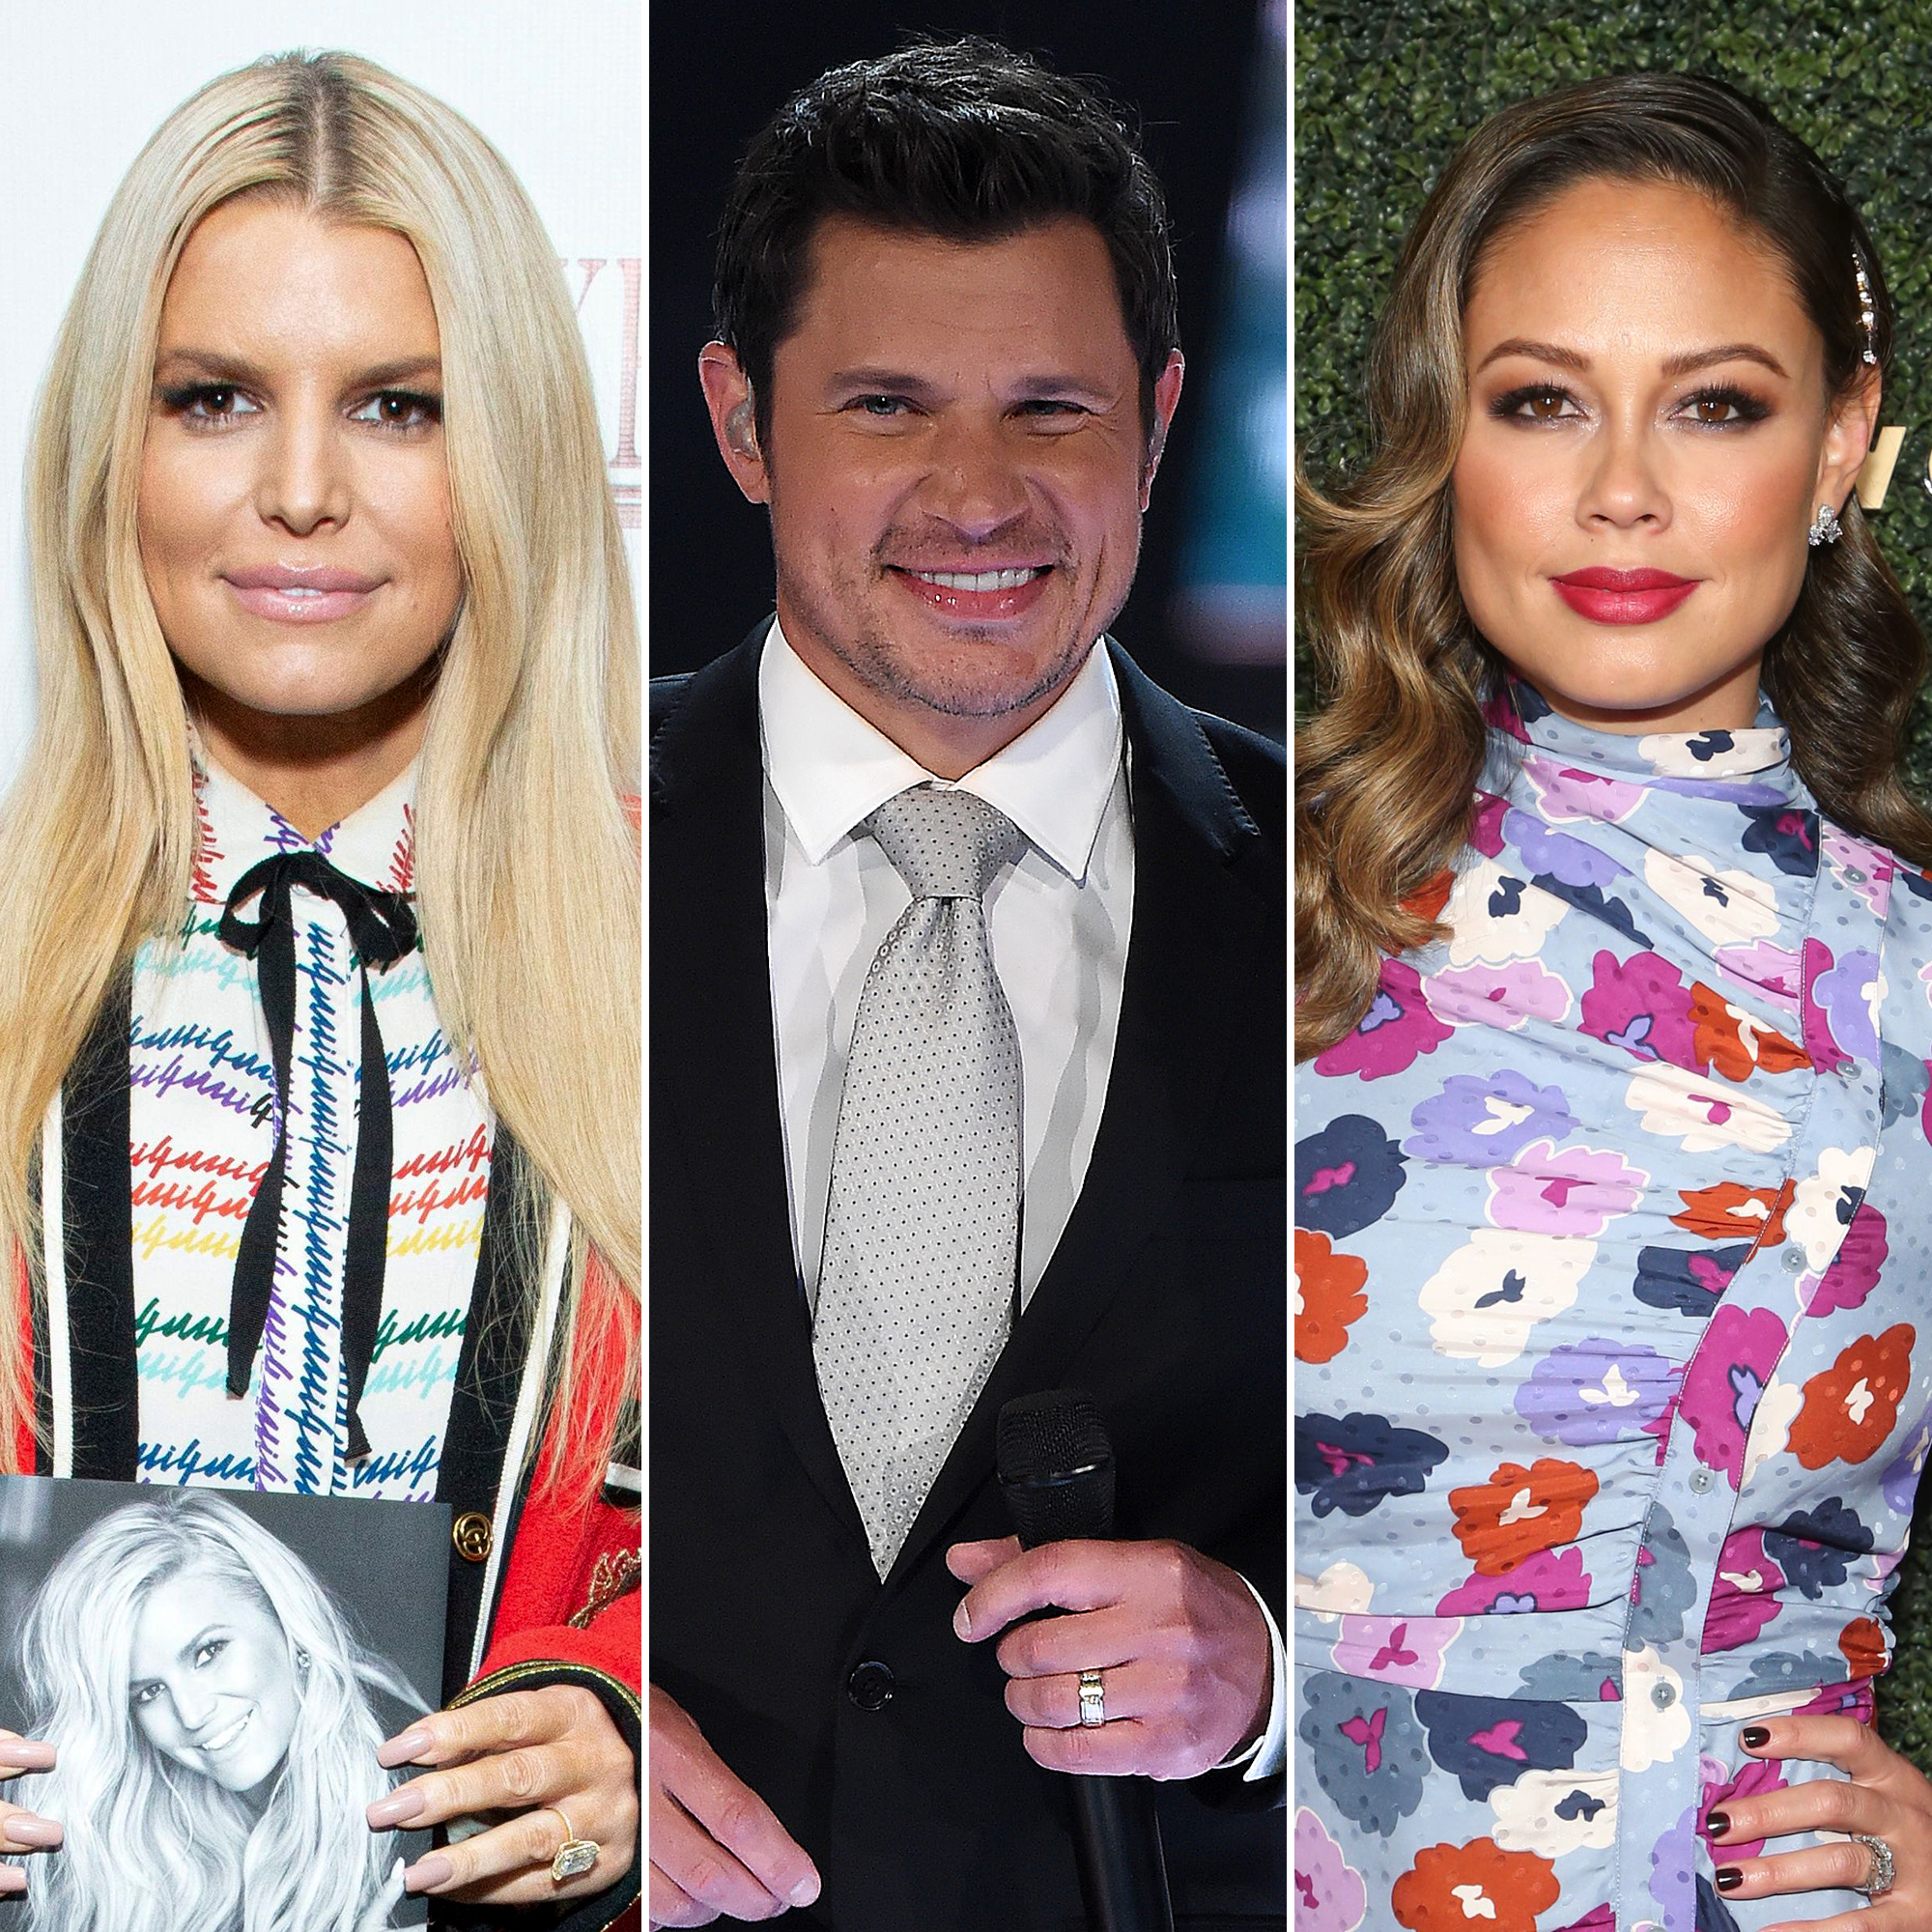 Jessica Simpson shades ex-husband Nick Lachey with comment about 'Newlyweds